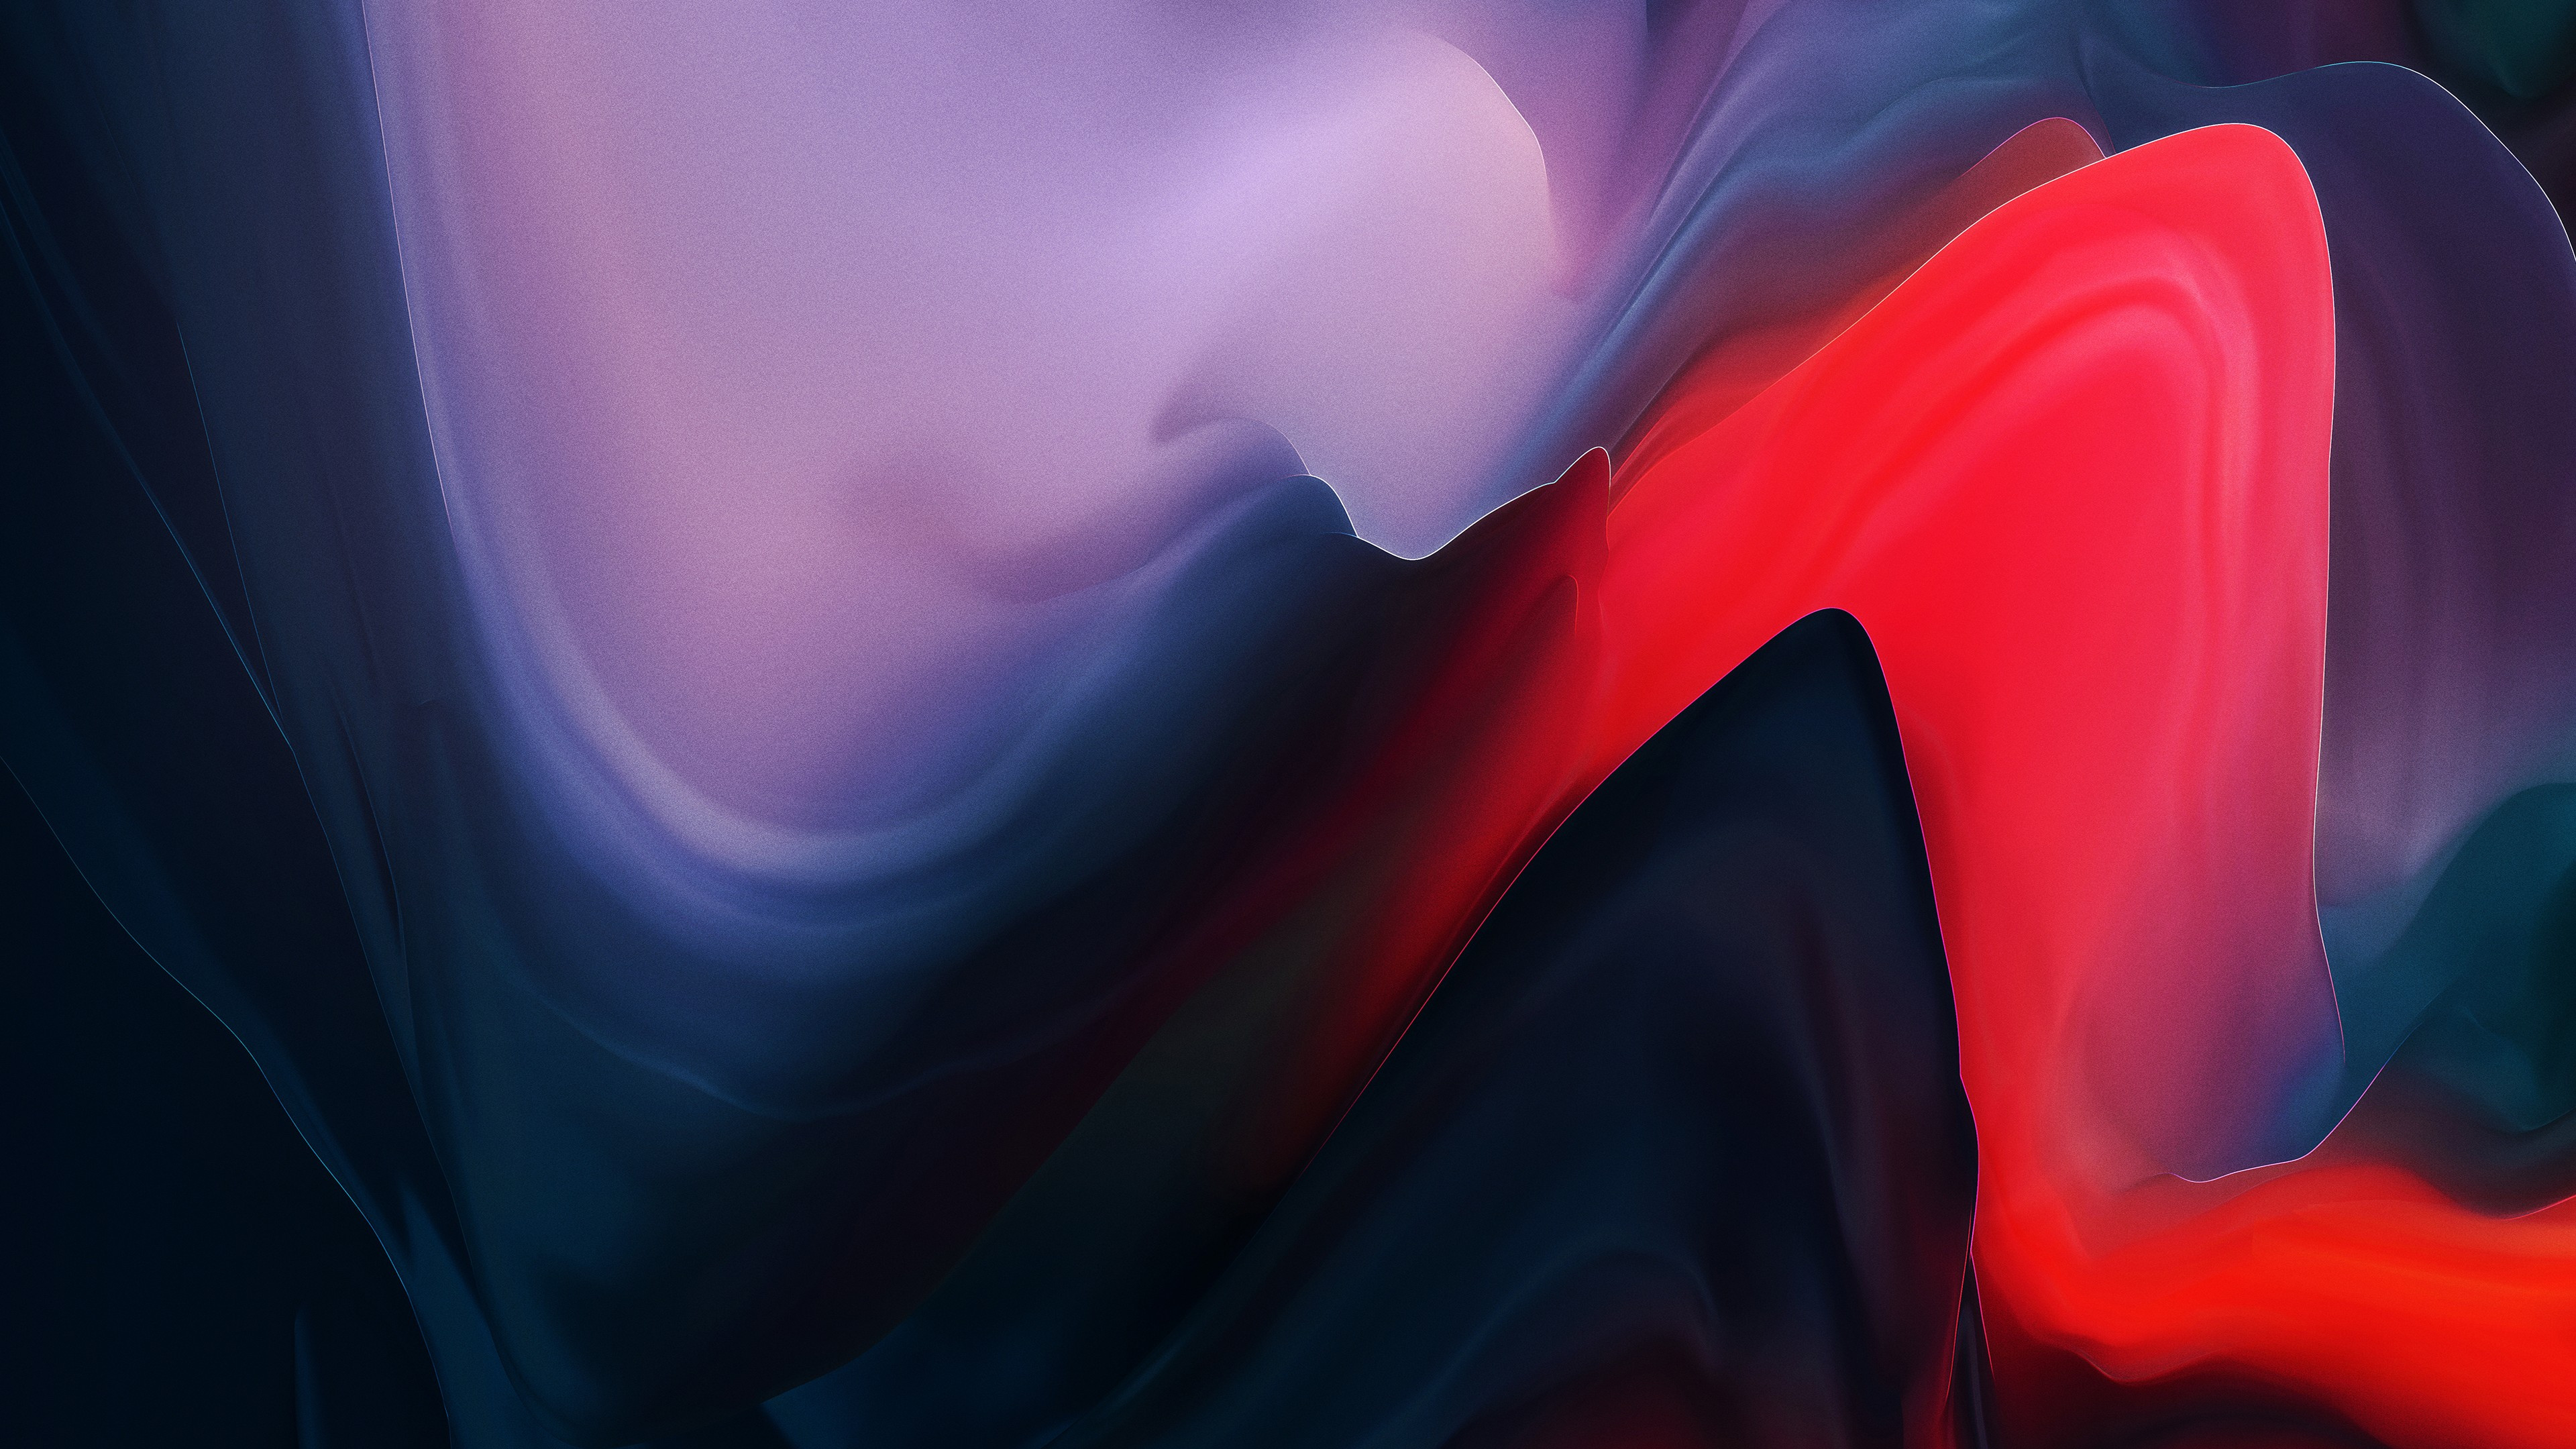 The Abstract from OnePlus 6T wallpaper 3840x2160